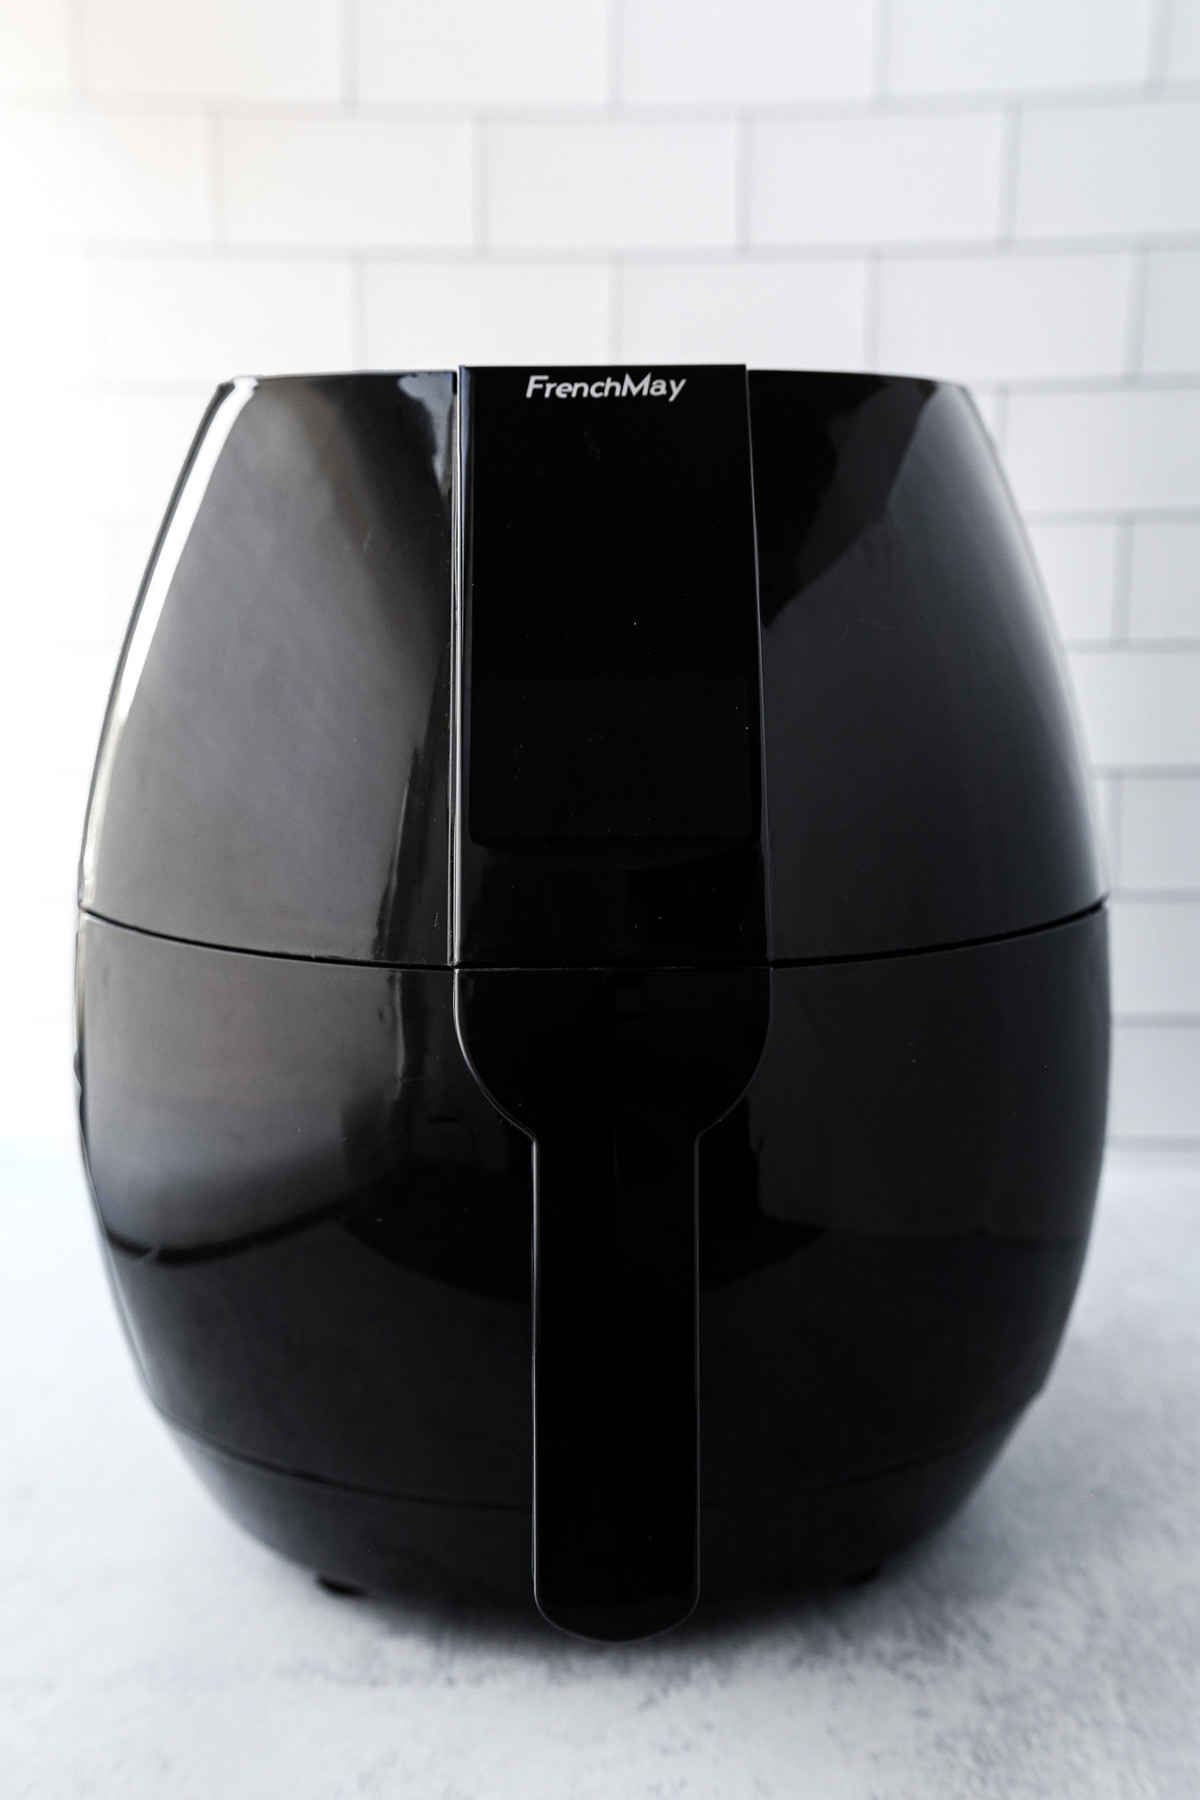 air fryer (FrenchMay)